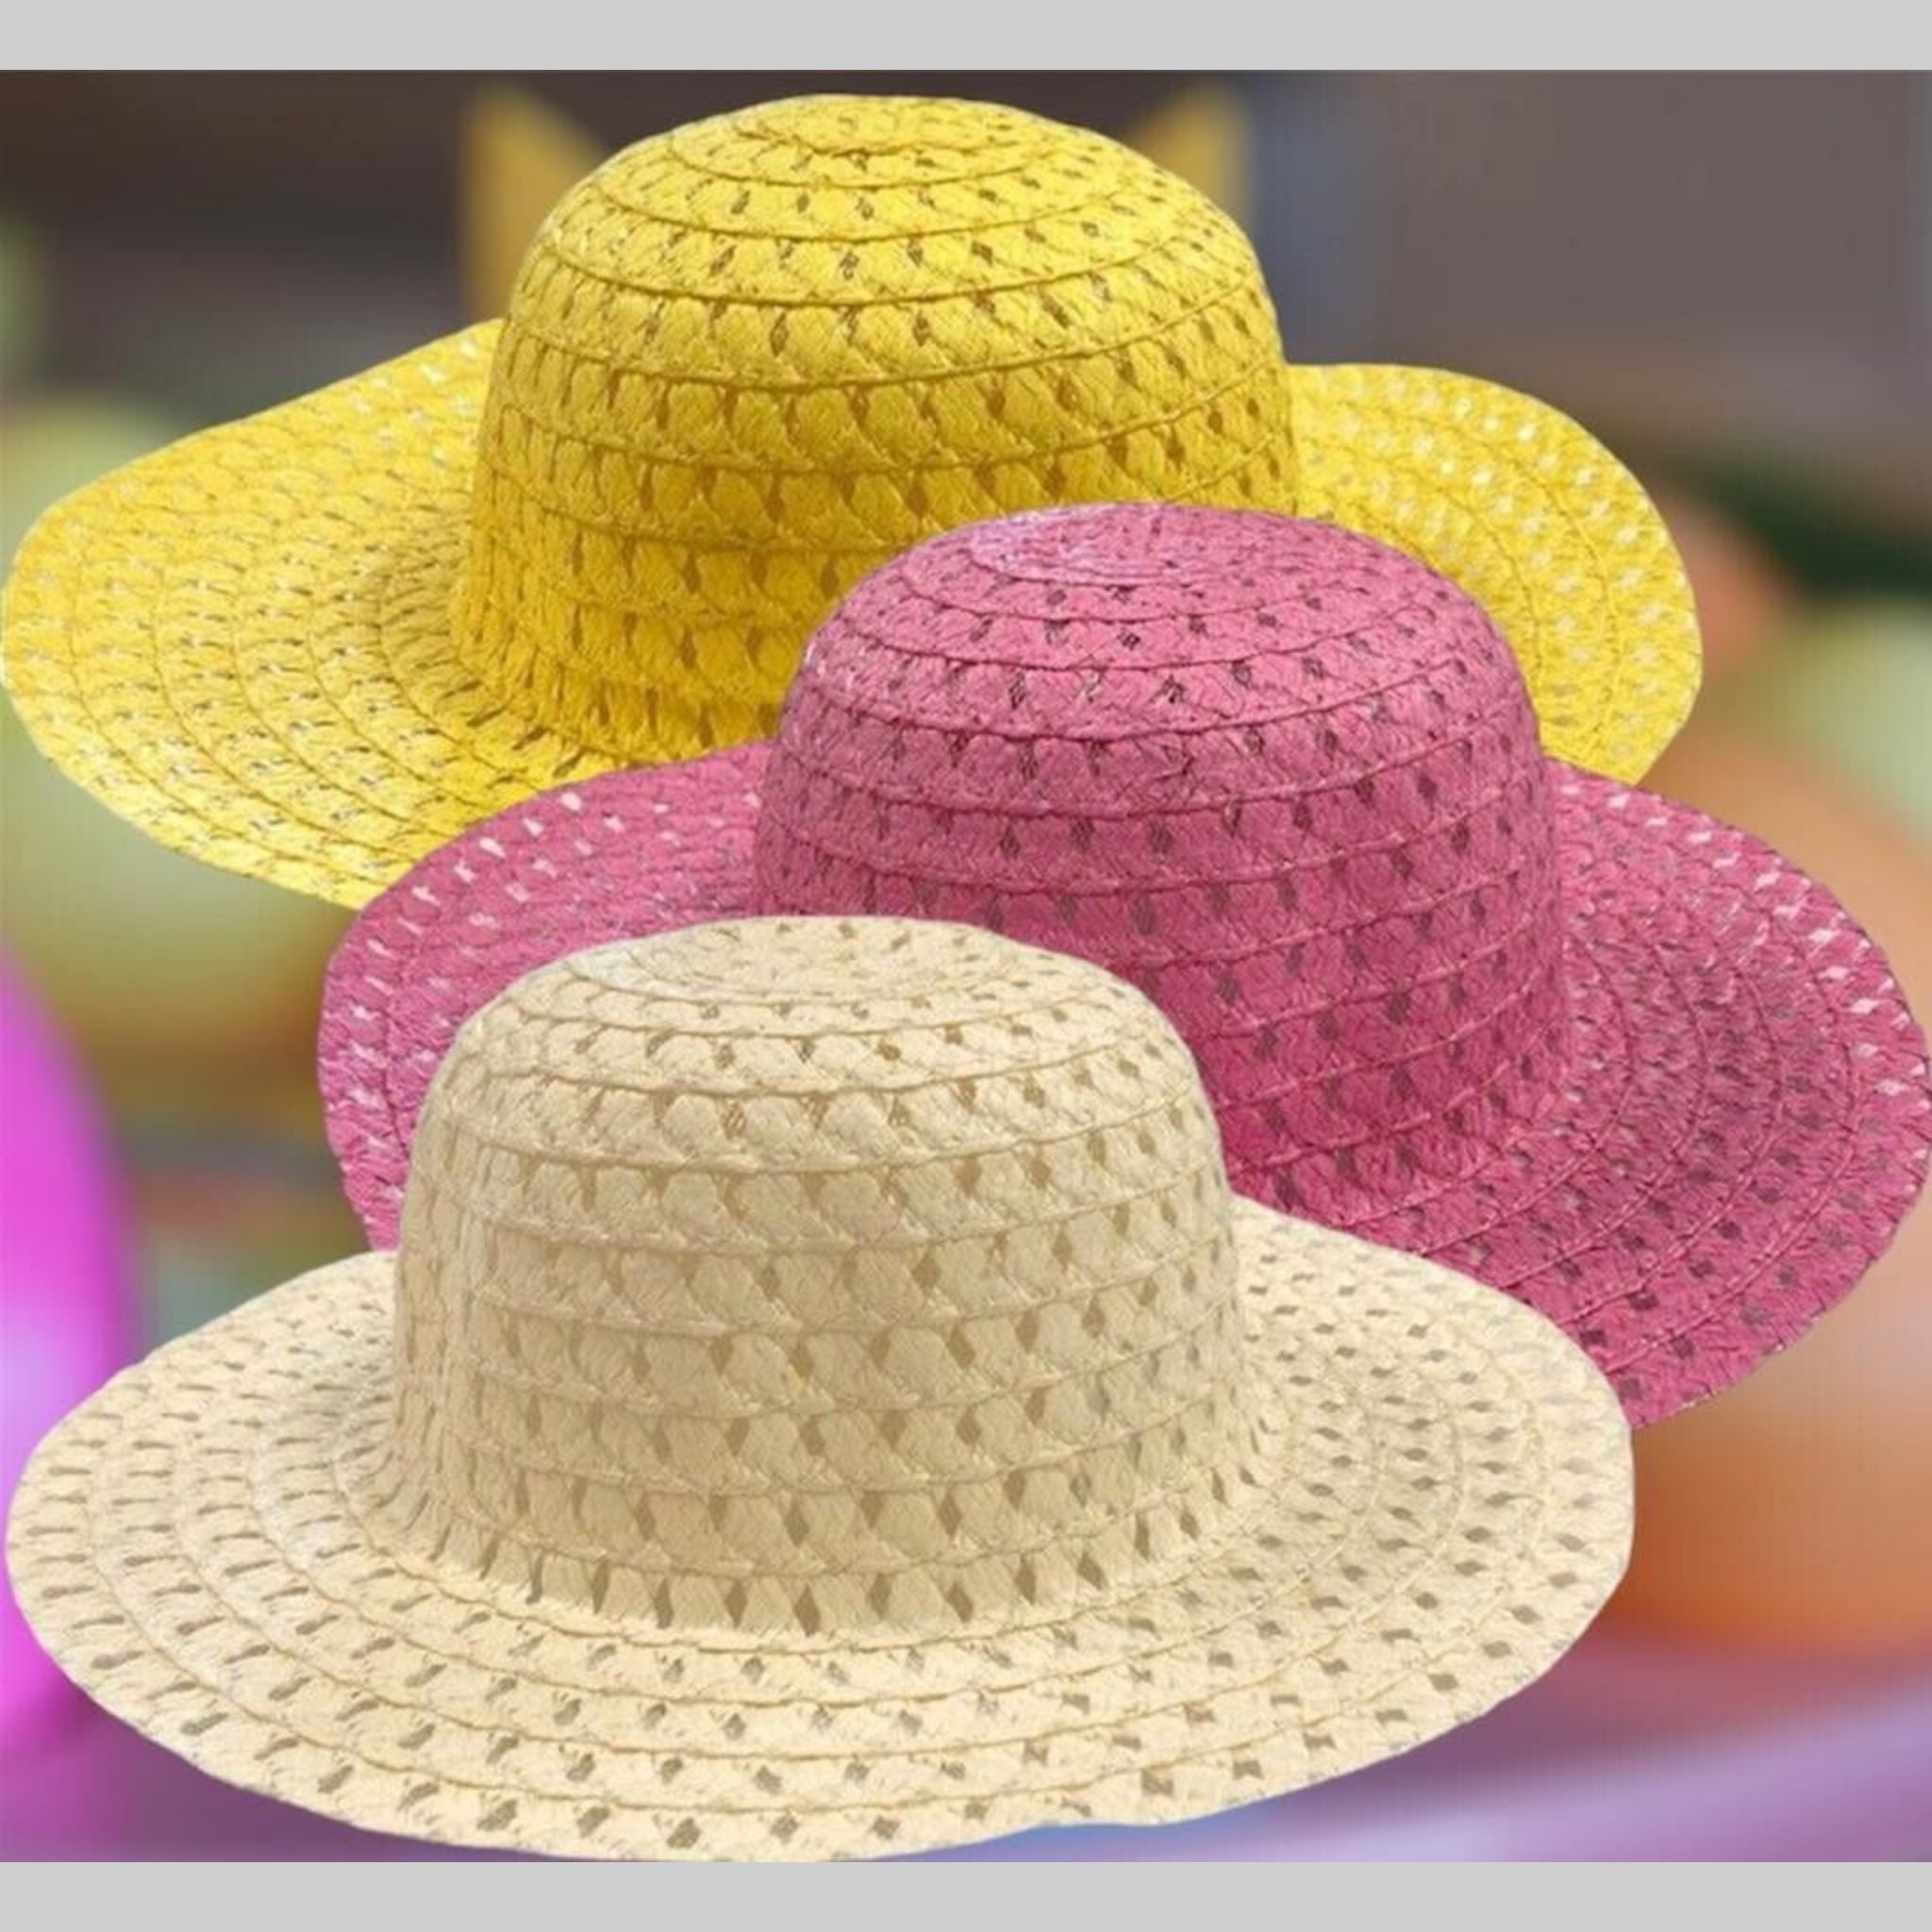 Beclen Harp 3 Easter Bonnet Art And Craft Straw Cowboy/Cowgirl Hats For Kids Parade Decoration-Perfect Gift For Children